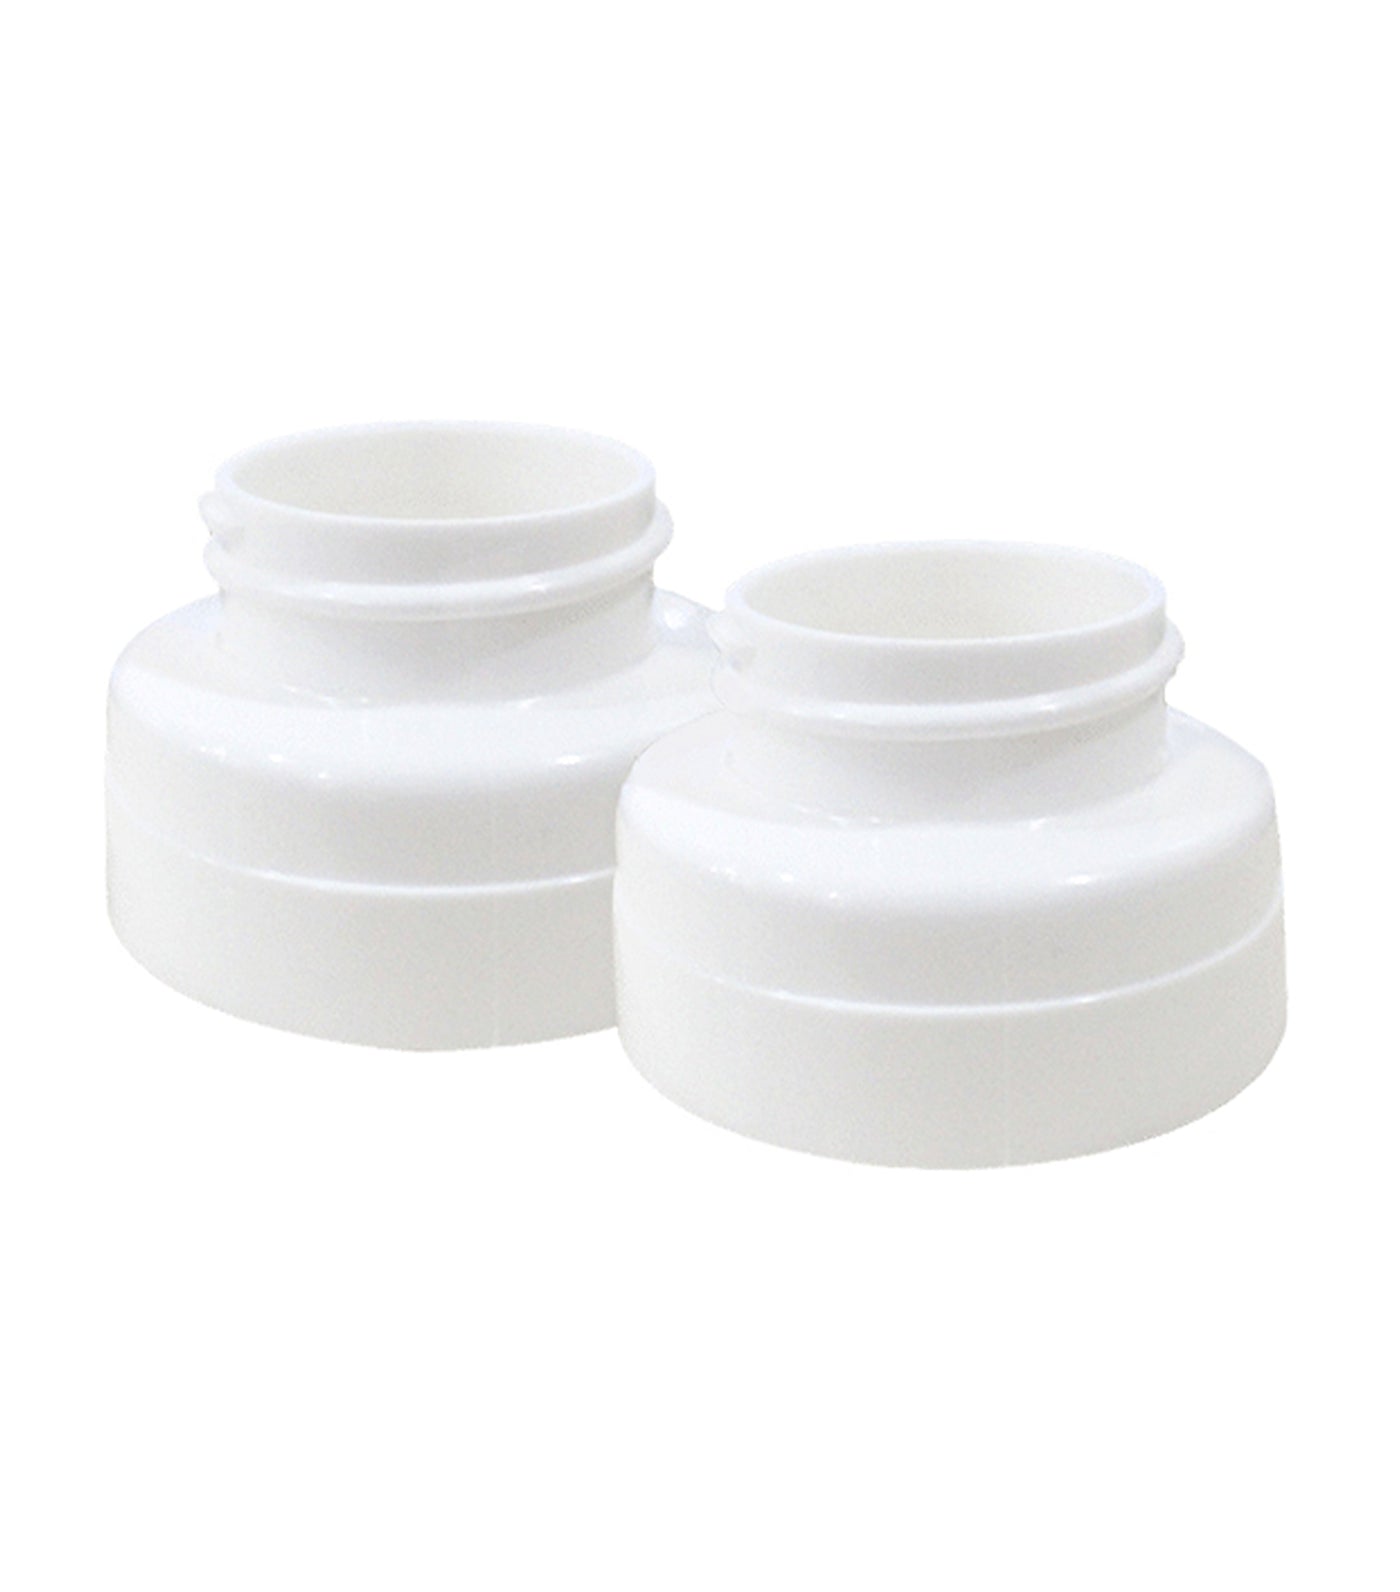 Neck Adaptor Narrow Neck Shield to Wide Neck Bottle Converters - Pair